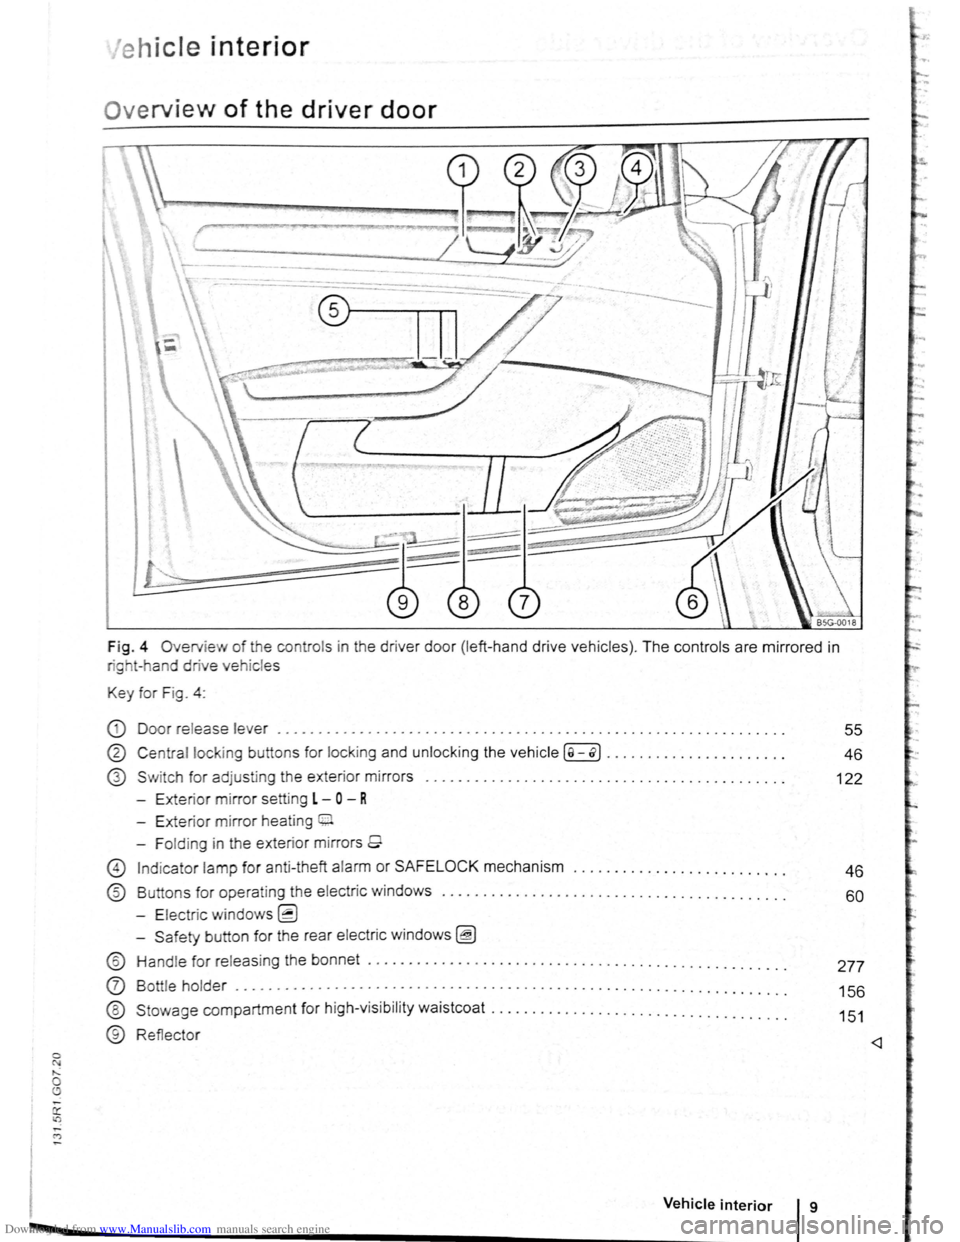 VOLKSWAGEN BEETLE 2004  Owners Manual Downloaded from www.Manualslib.com manuals search engine 0 N ,..; 0 
e h ic le interior 
Ov erview of the driver door 
Fig . 4 Overv ie w of the  contro ls  in  the drive r doo r (left -ha nd  dr ive